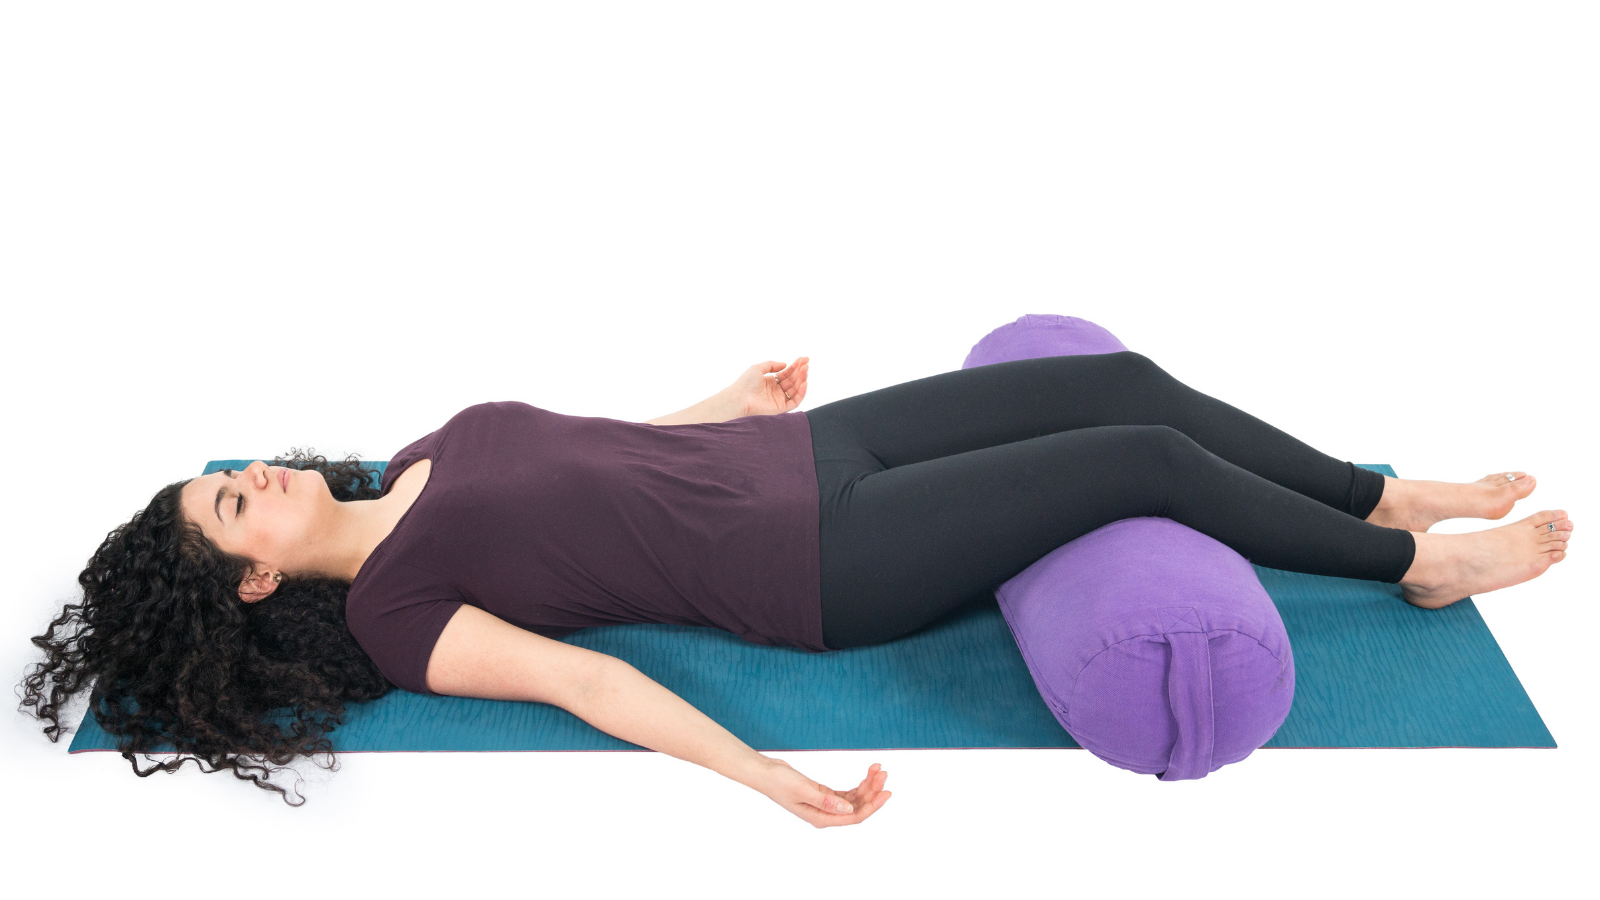 Supported Savasana Pose or Corpse Pose perfect for deep rest and breath practices